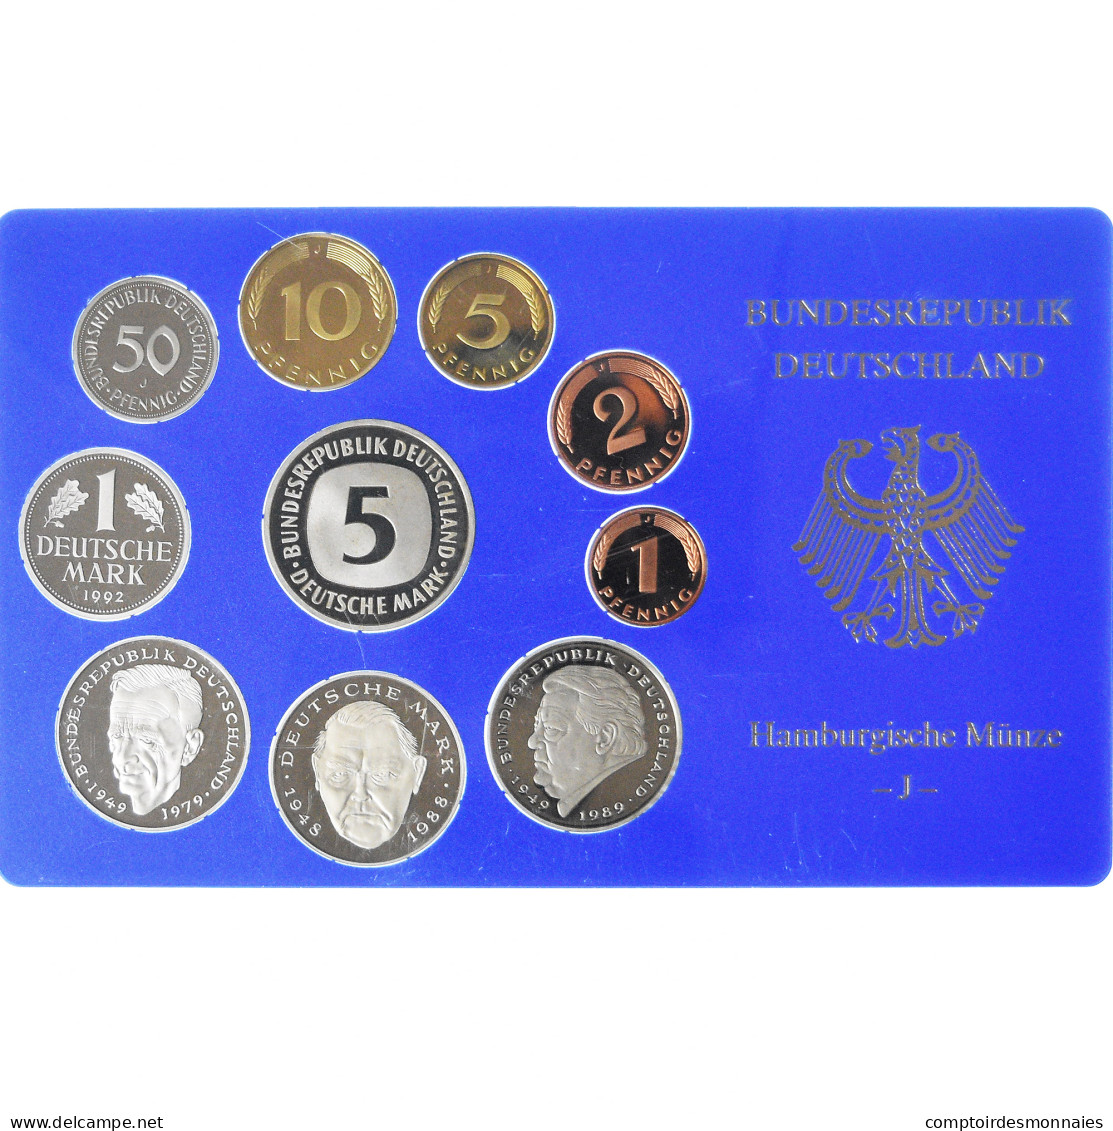 Monnaie, Allemagne, 1 Pfennig To 5 Mark, 1992, Hambourg, BE, FDC - Mint Sets & Proof Sets